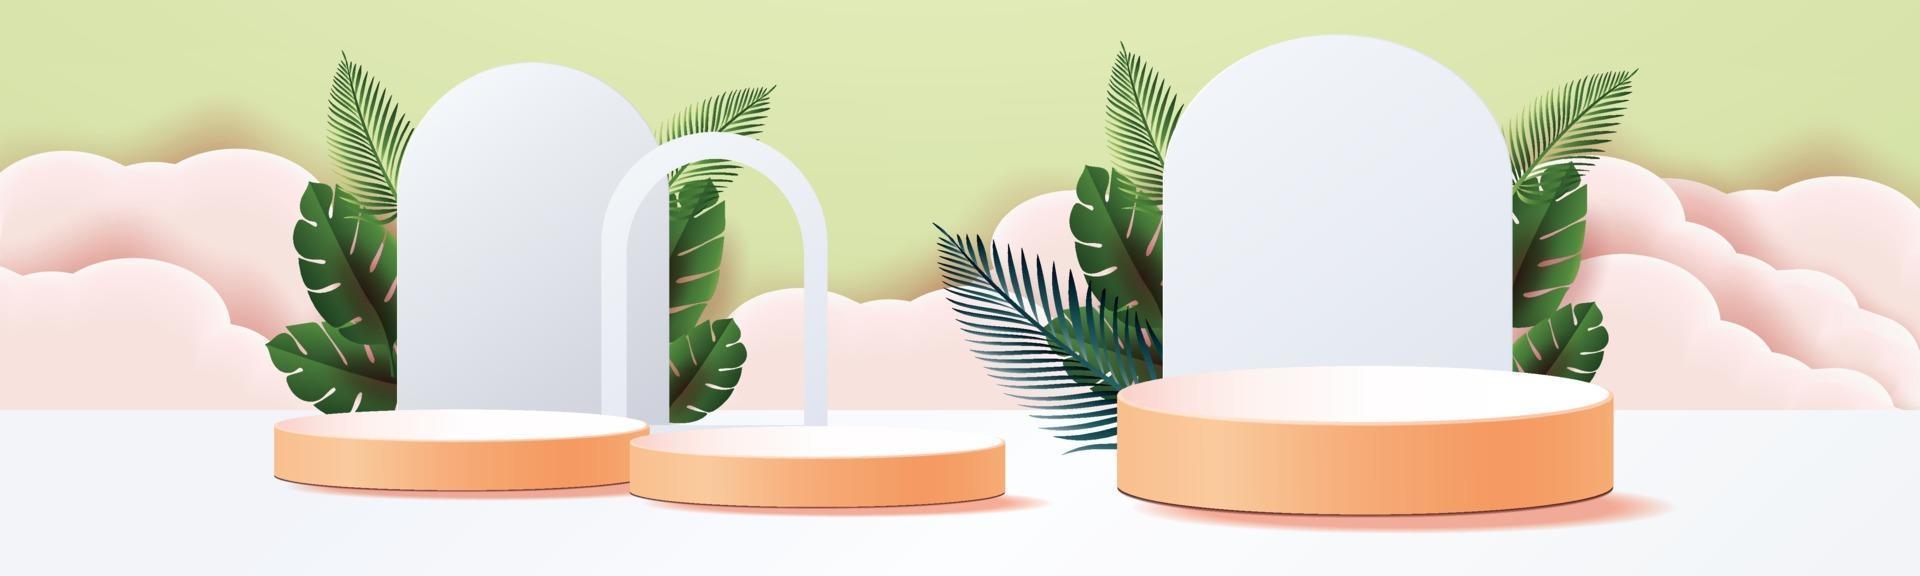 3D podiums and tropical leaves in the clouds vector